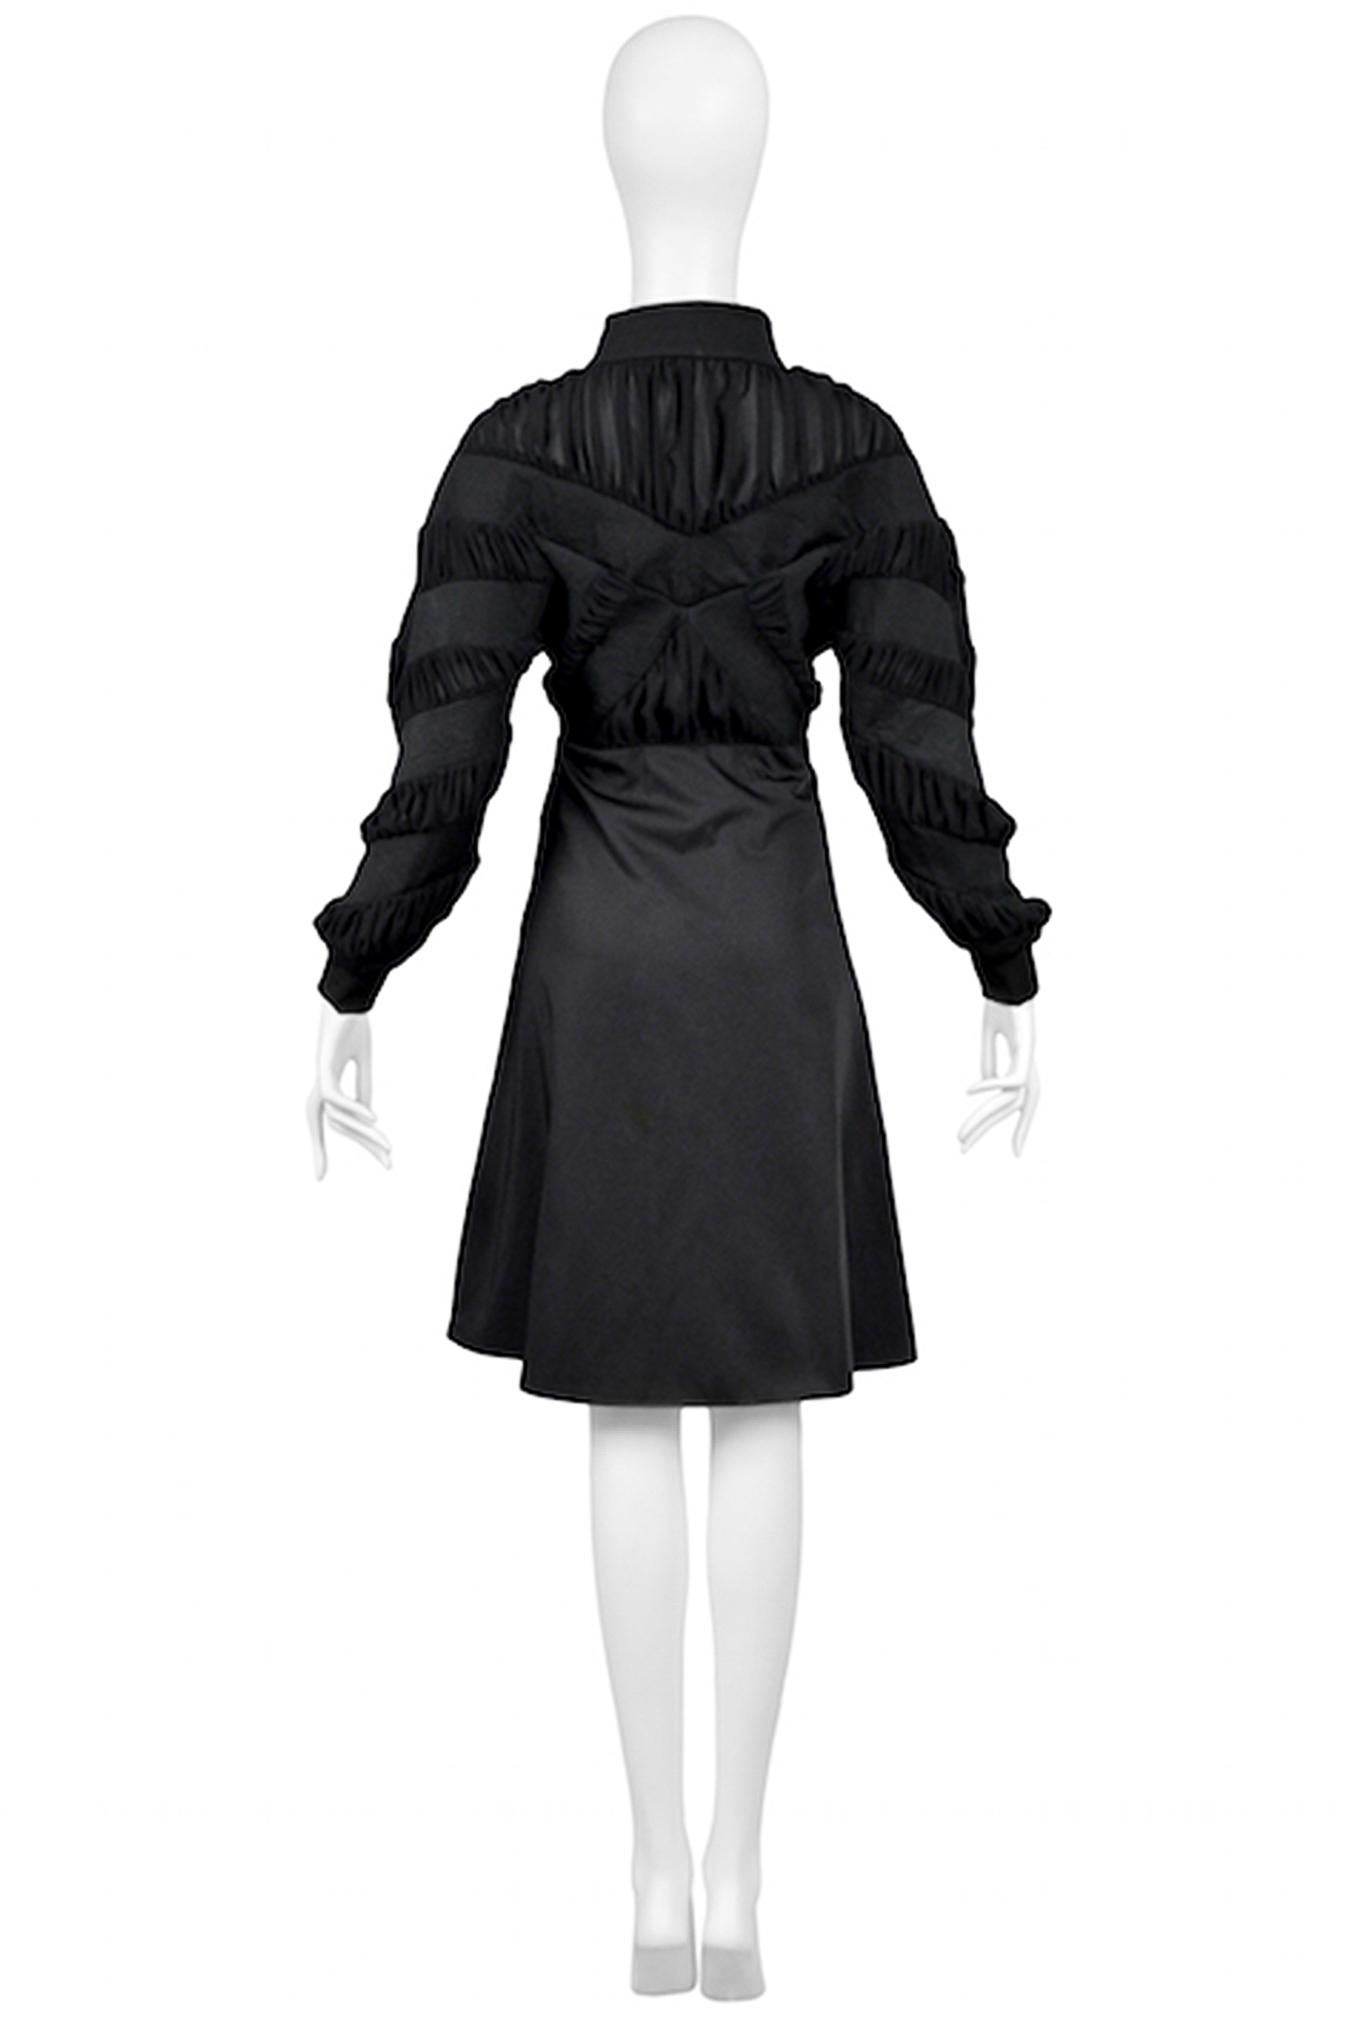 Resurrection Vintage is excited to offer a vintage Balenciaga by Nicolas Ghesquière black coat dress featuring a high collar, ruffle insets in the bodice and sleeves, a fitted waist, peplum, long sleeves with cuffs, circle skirt, and silver center